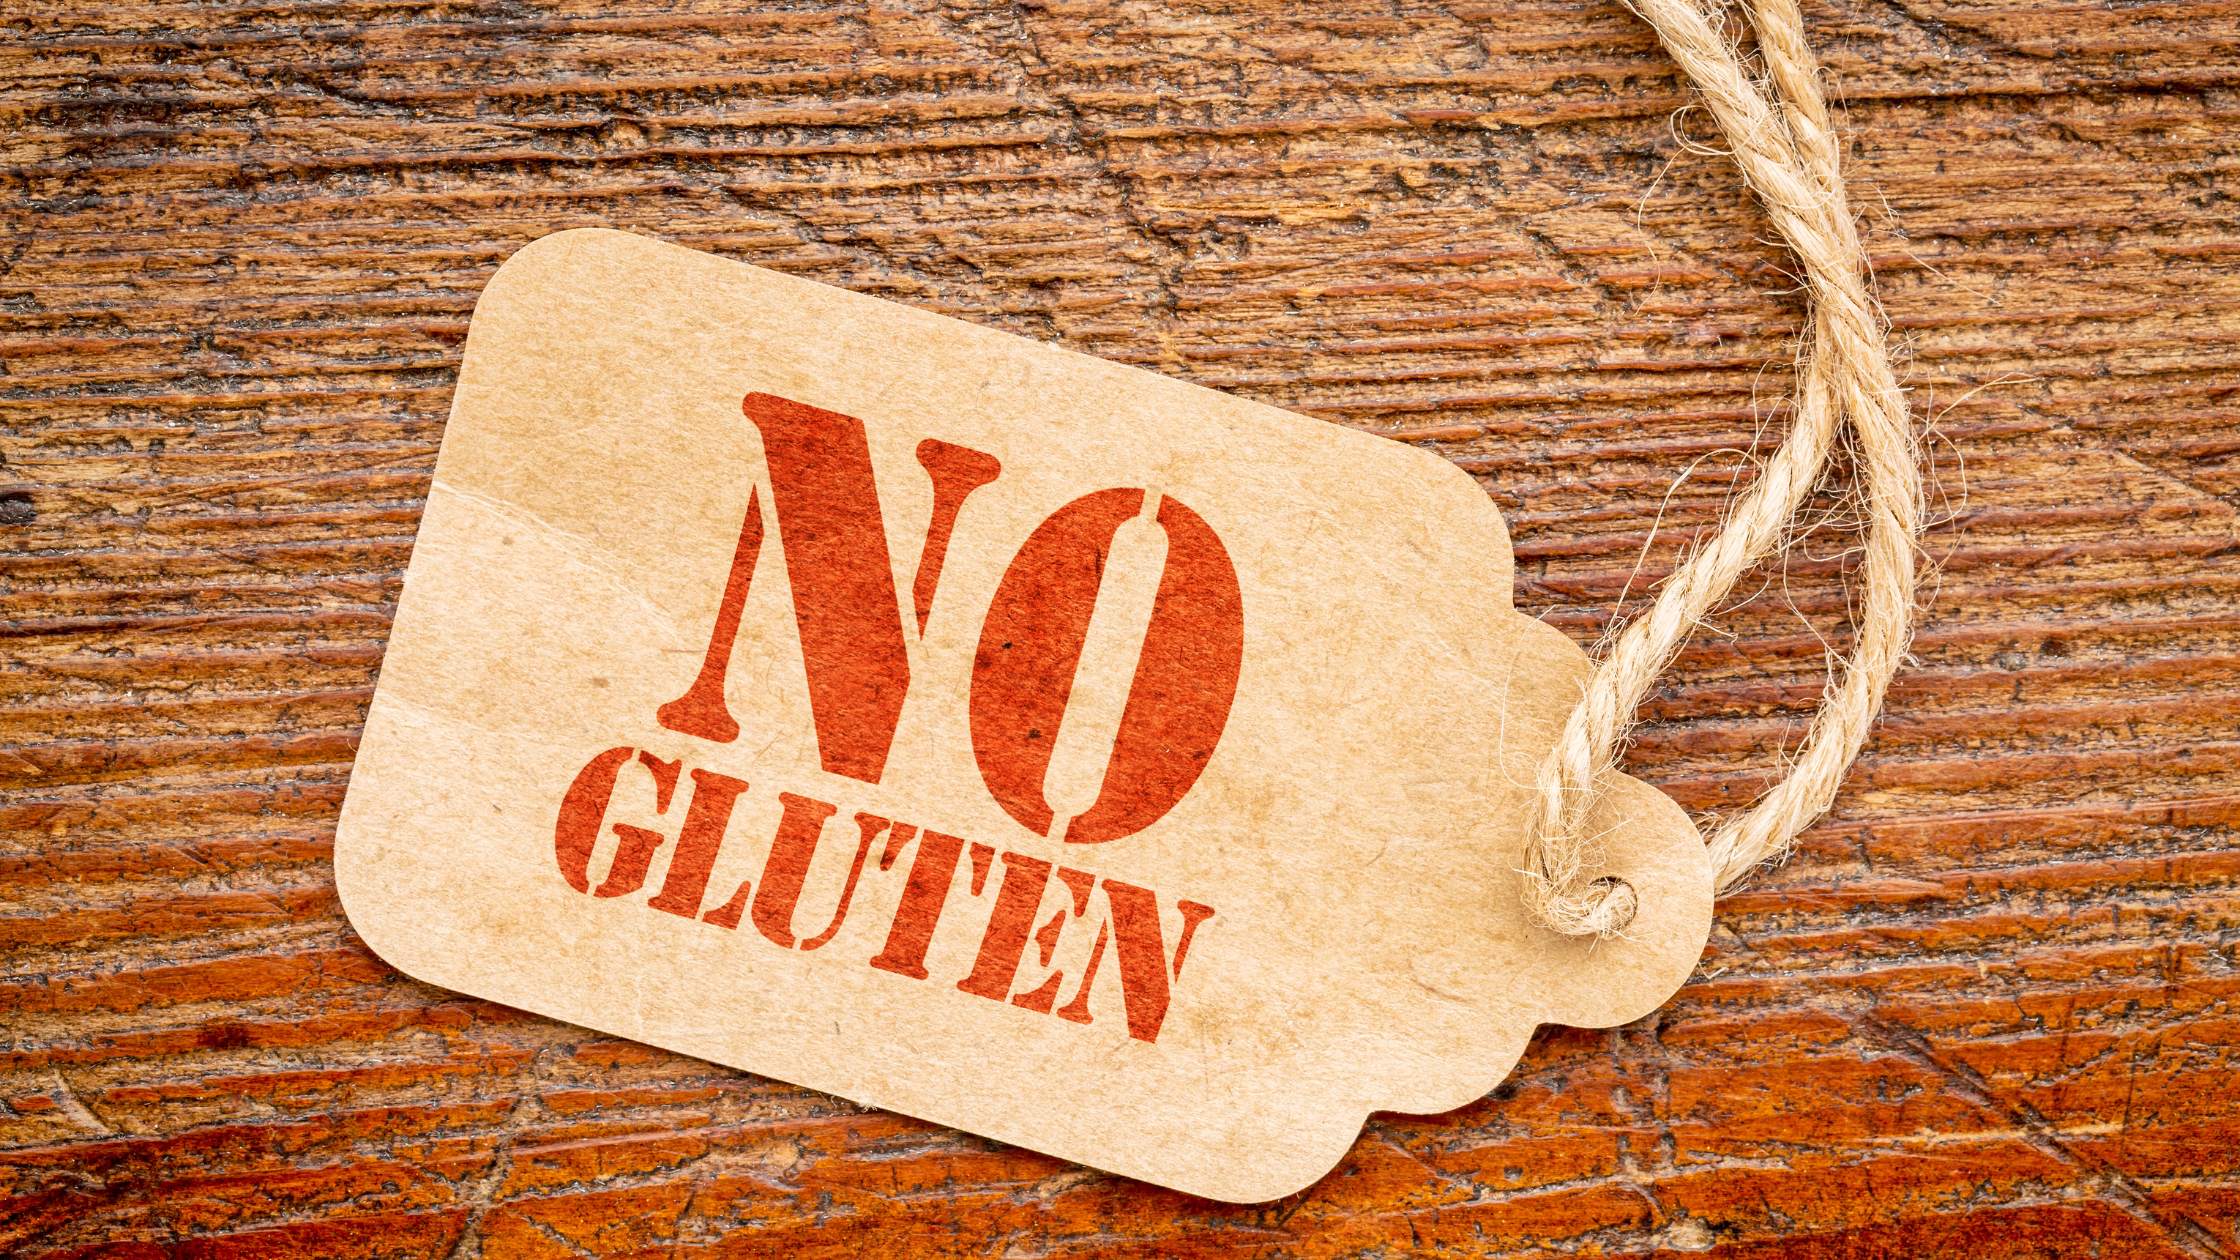 tag saying "no gluten" on a table